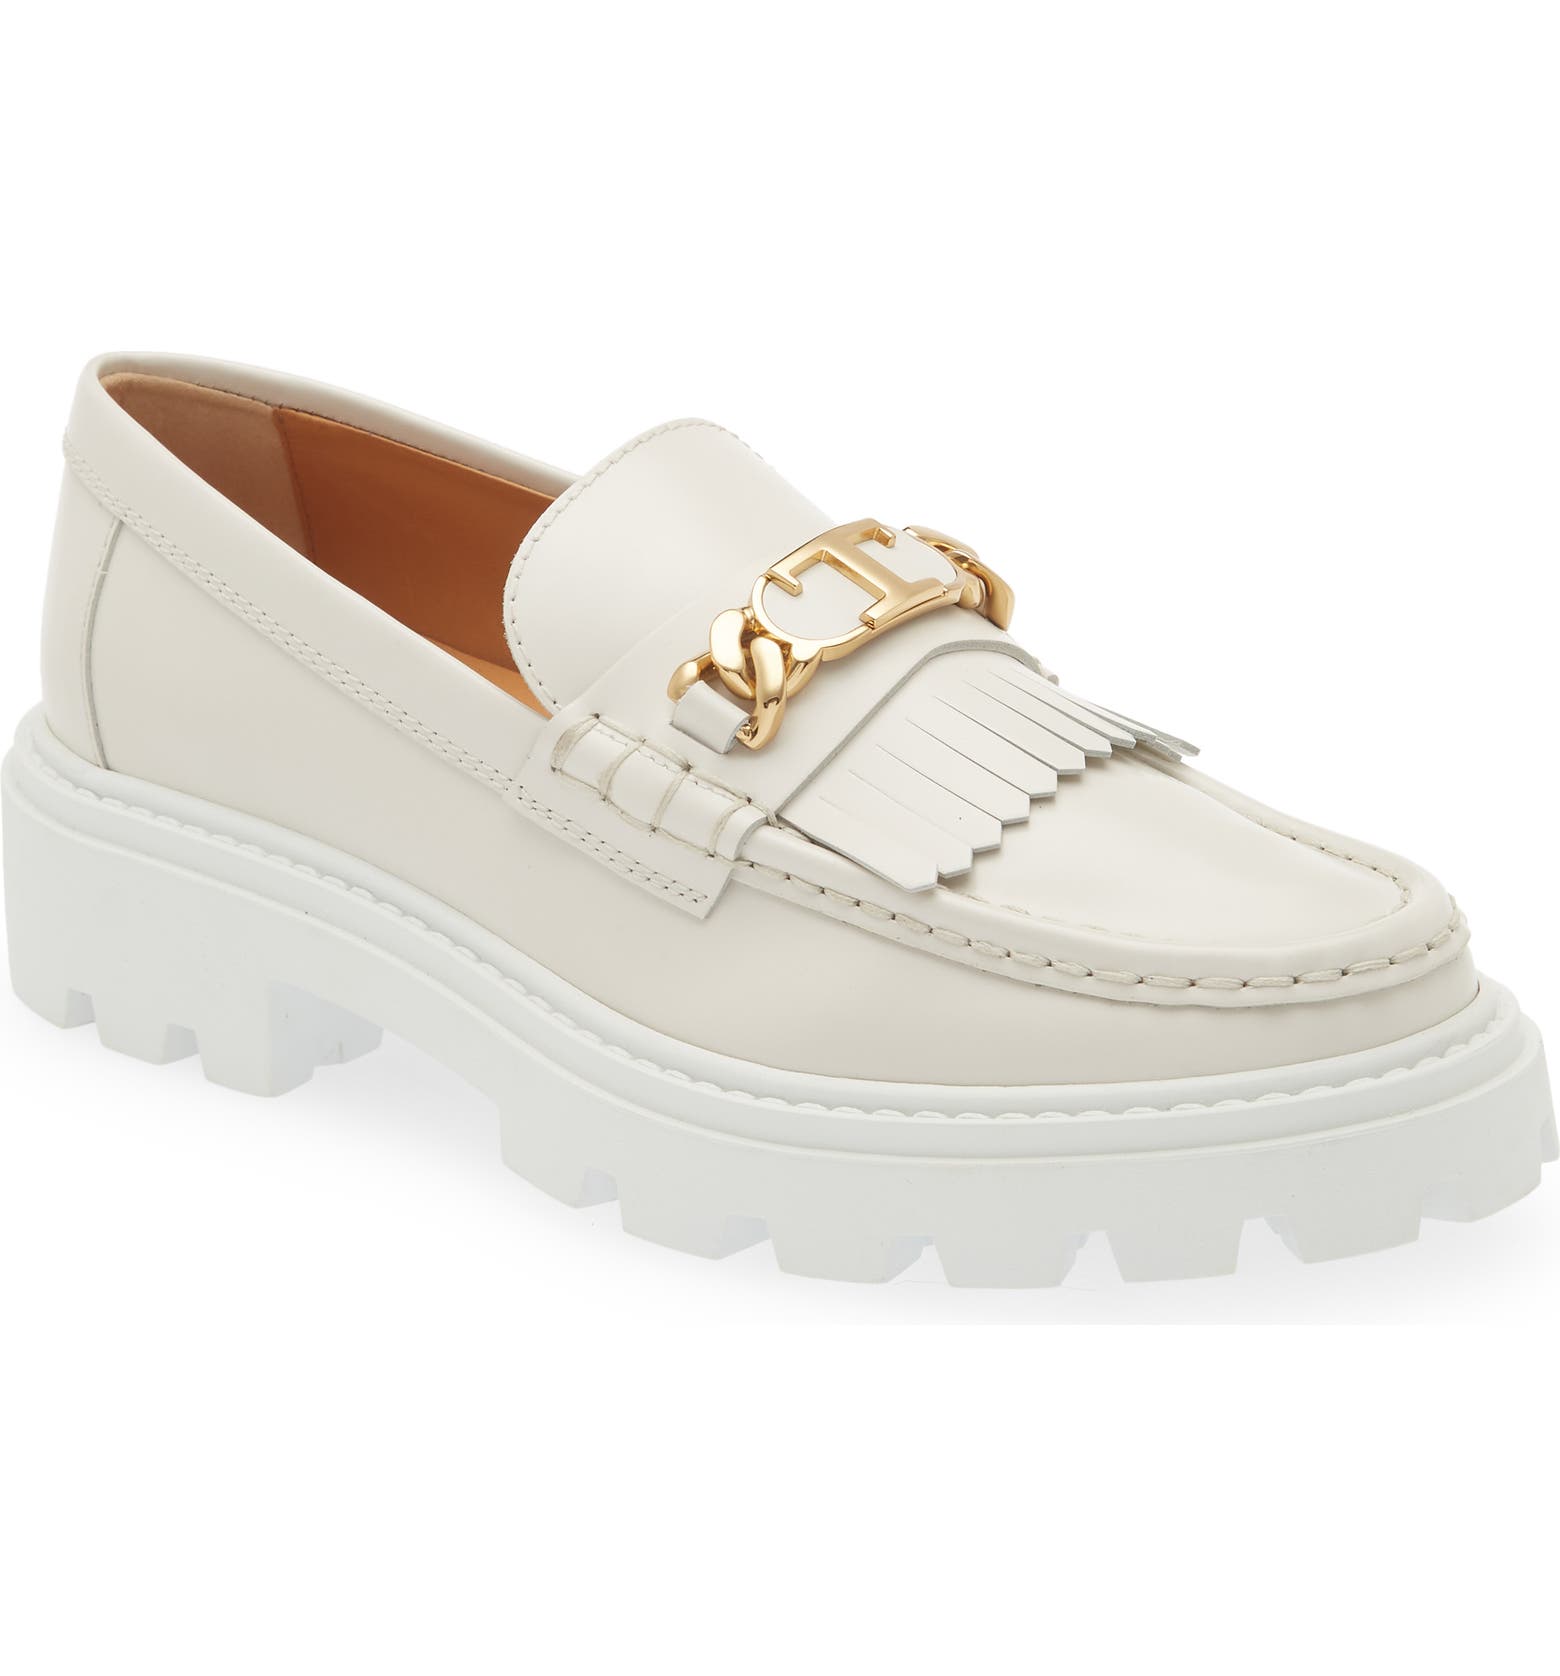 The Different Types Of Loafers: White lug sole kiltie loafers 